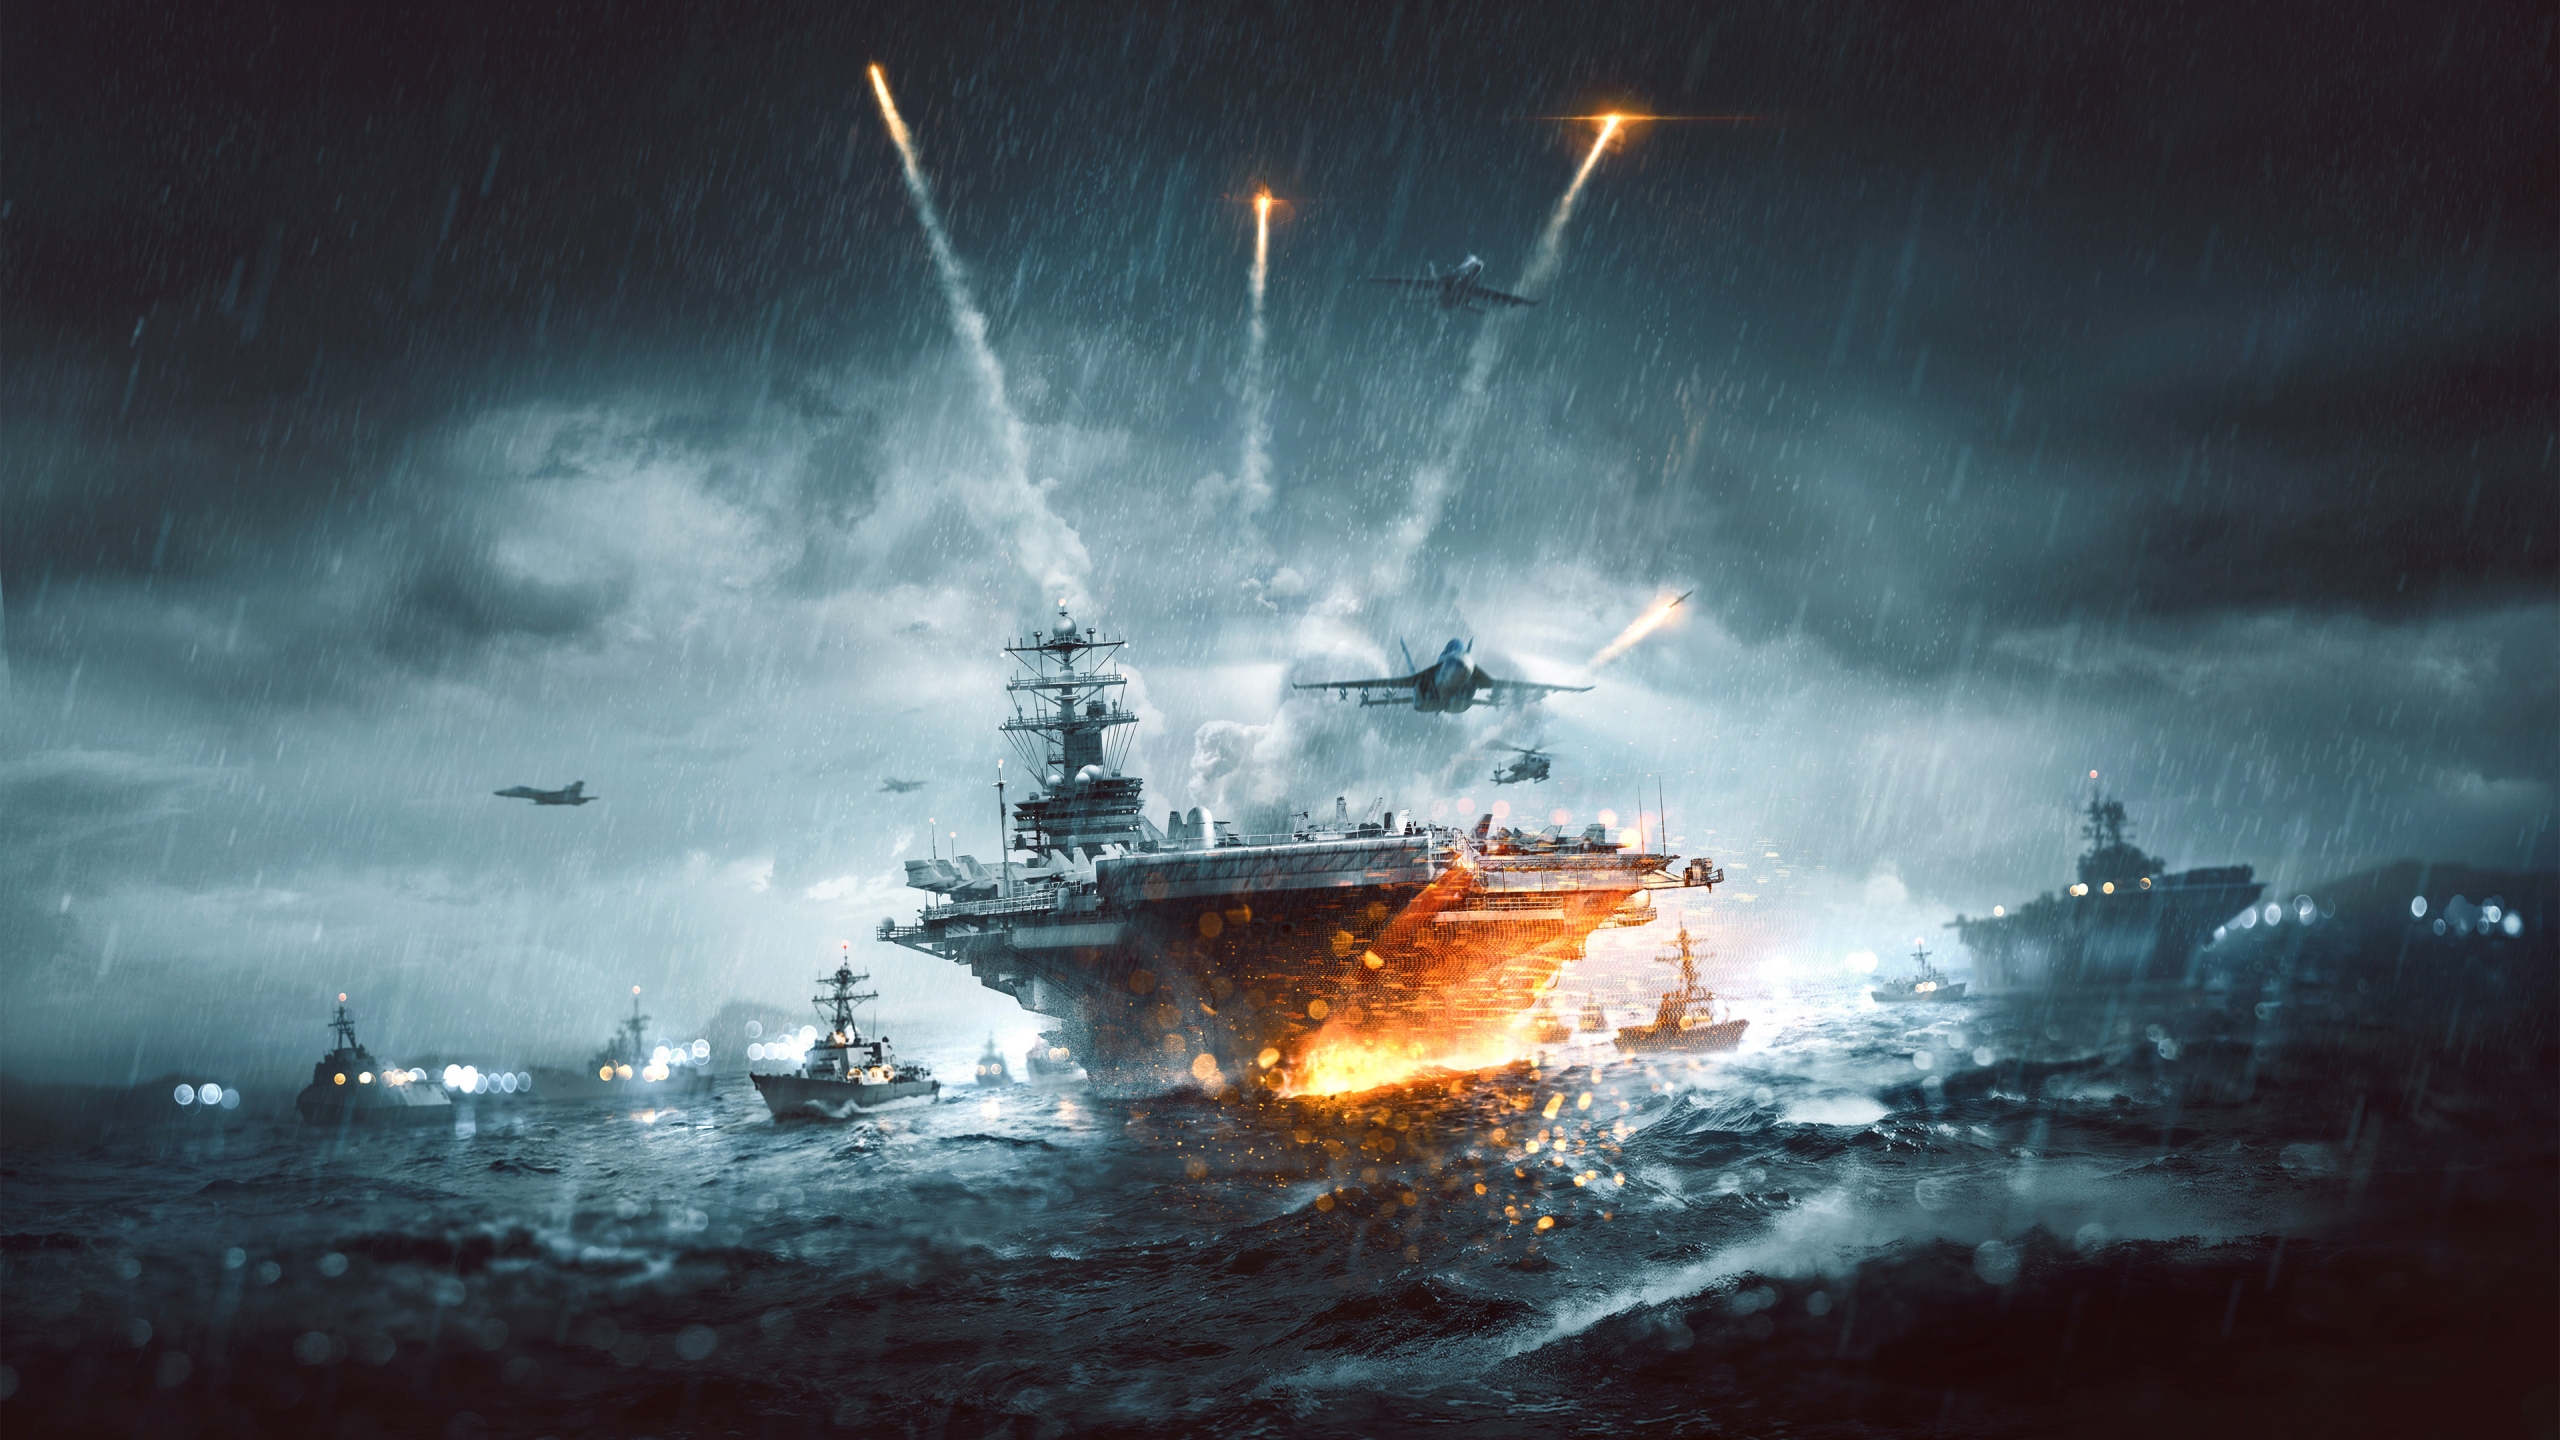 Download wallpaper 2560x1440 warship, battle, video game, dual wide 16:9 2560x1440 HD background, 19605